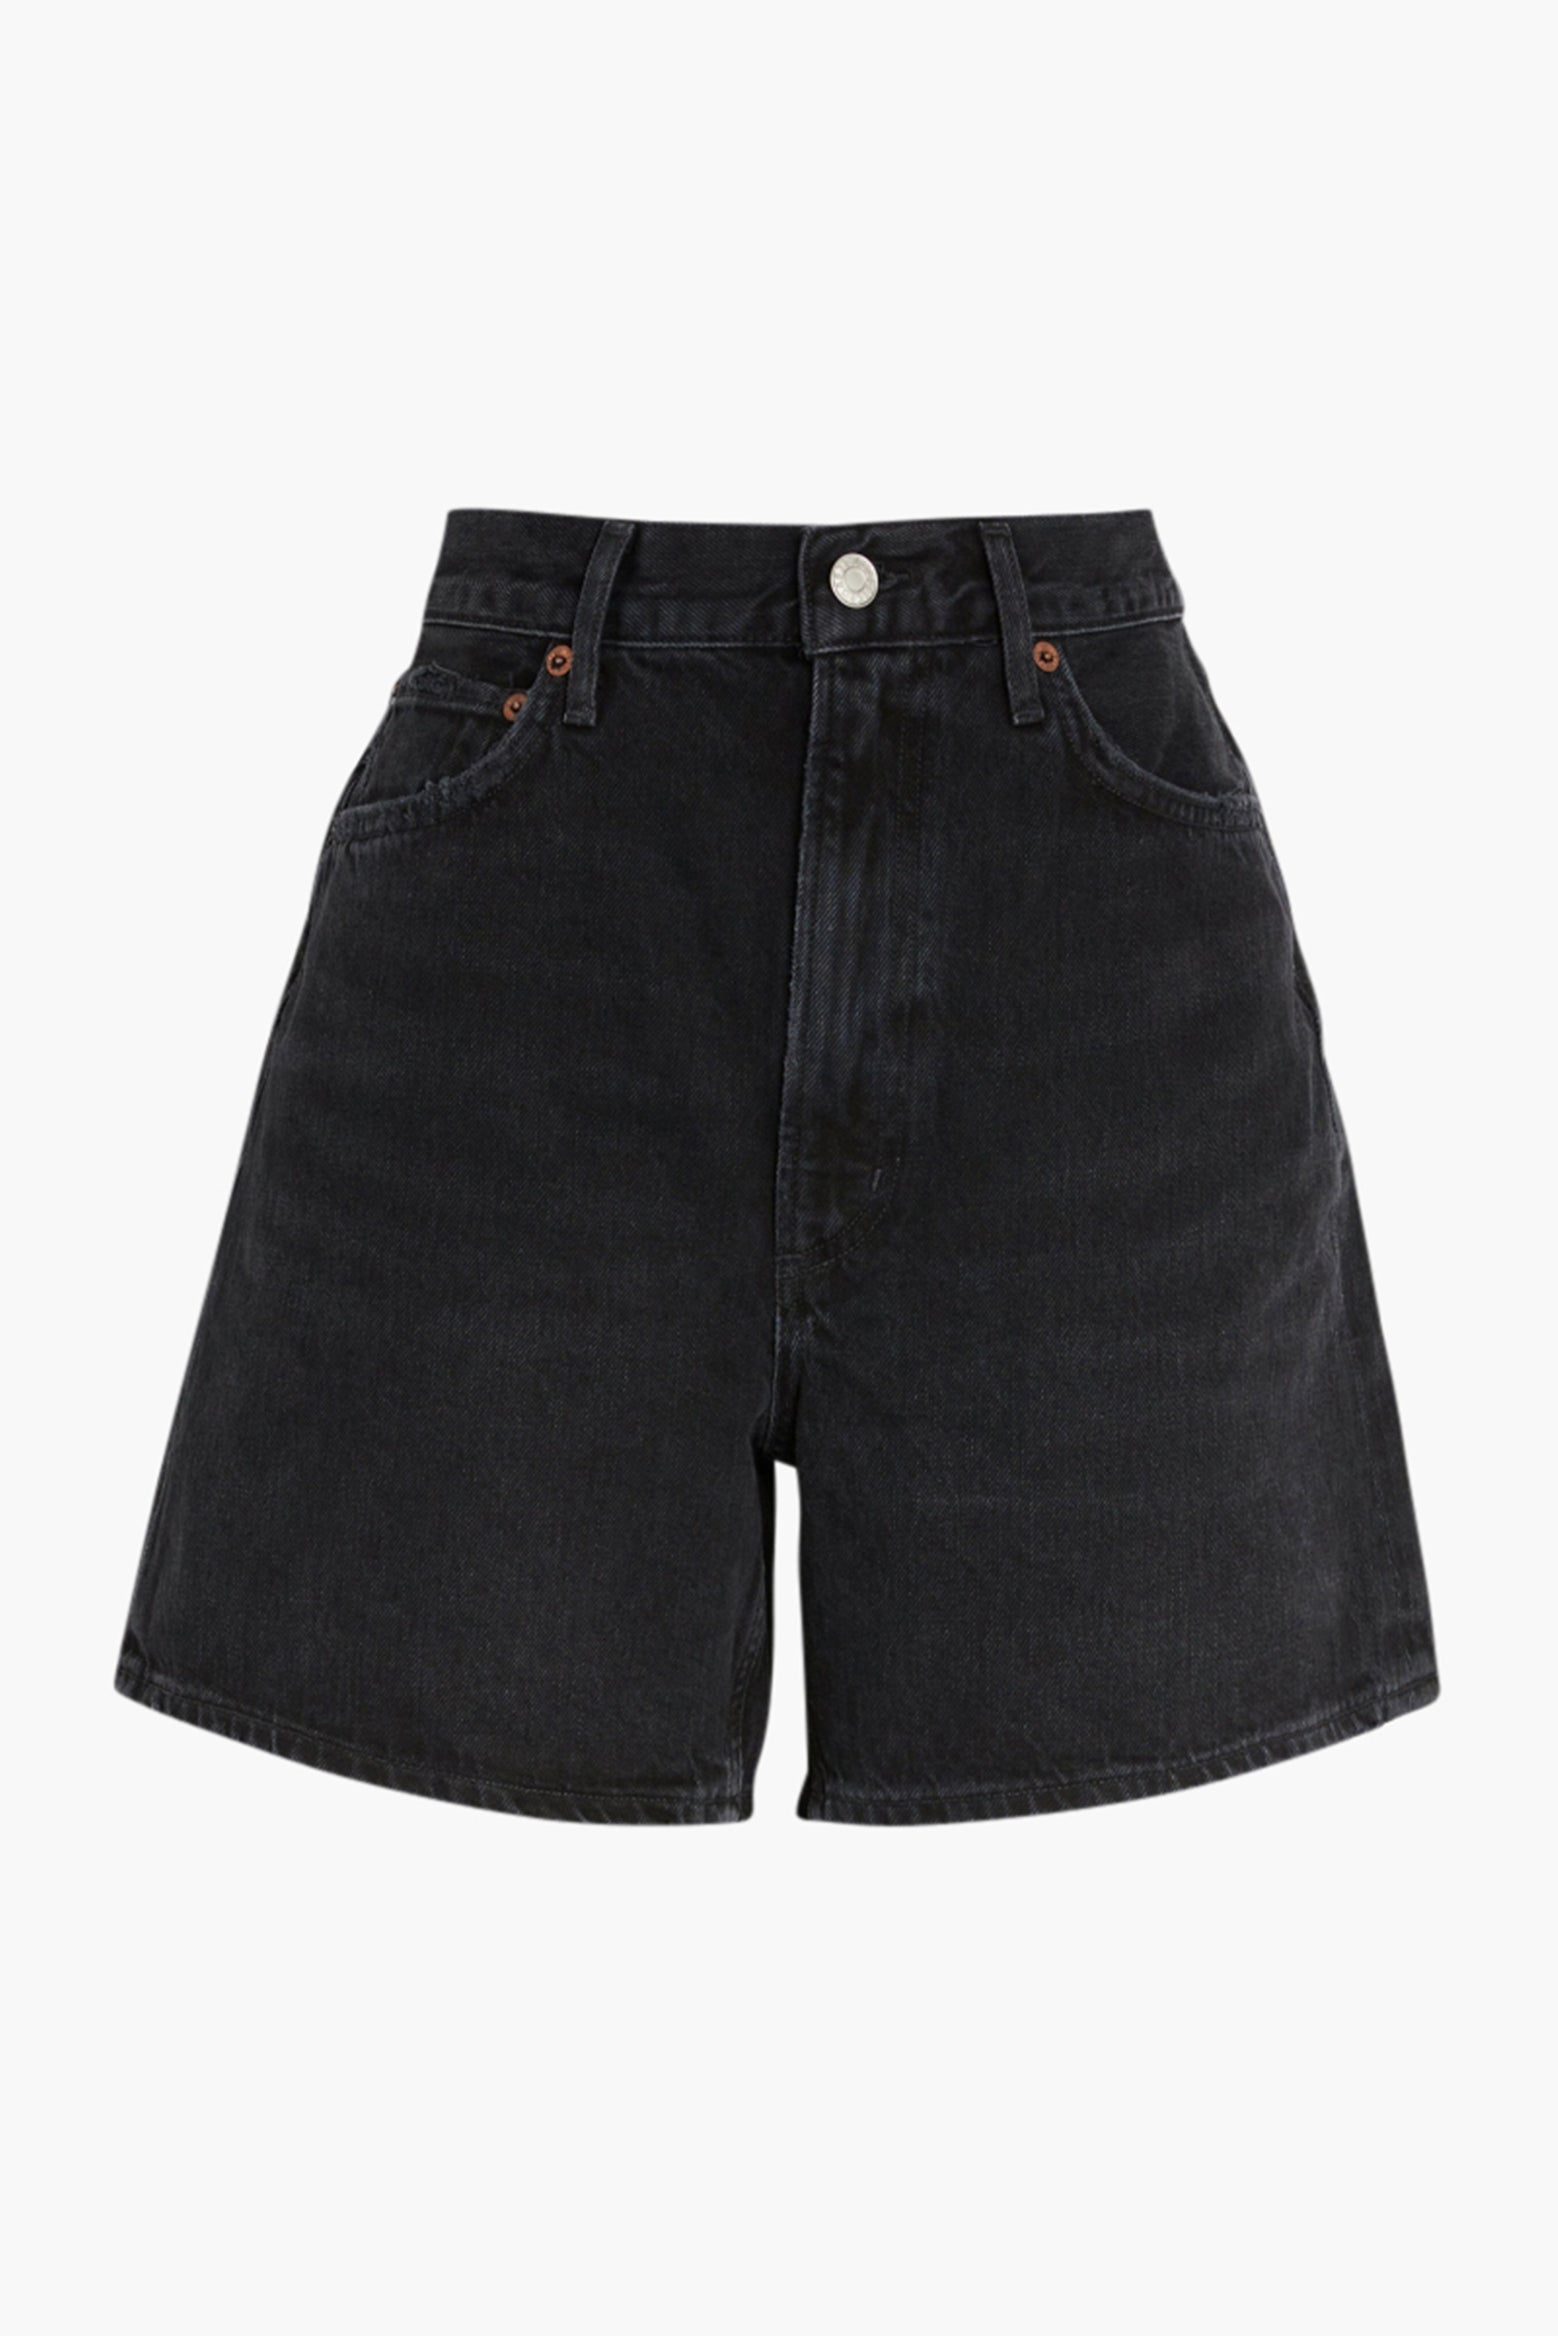 Agolde Stella Short in Bat Wash available at The New Trend Australia.